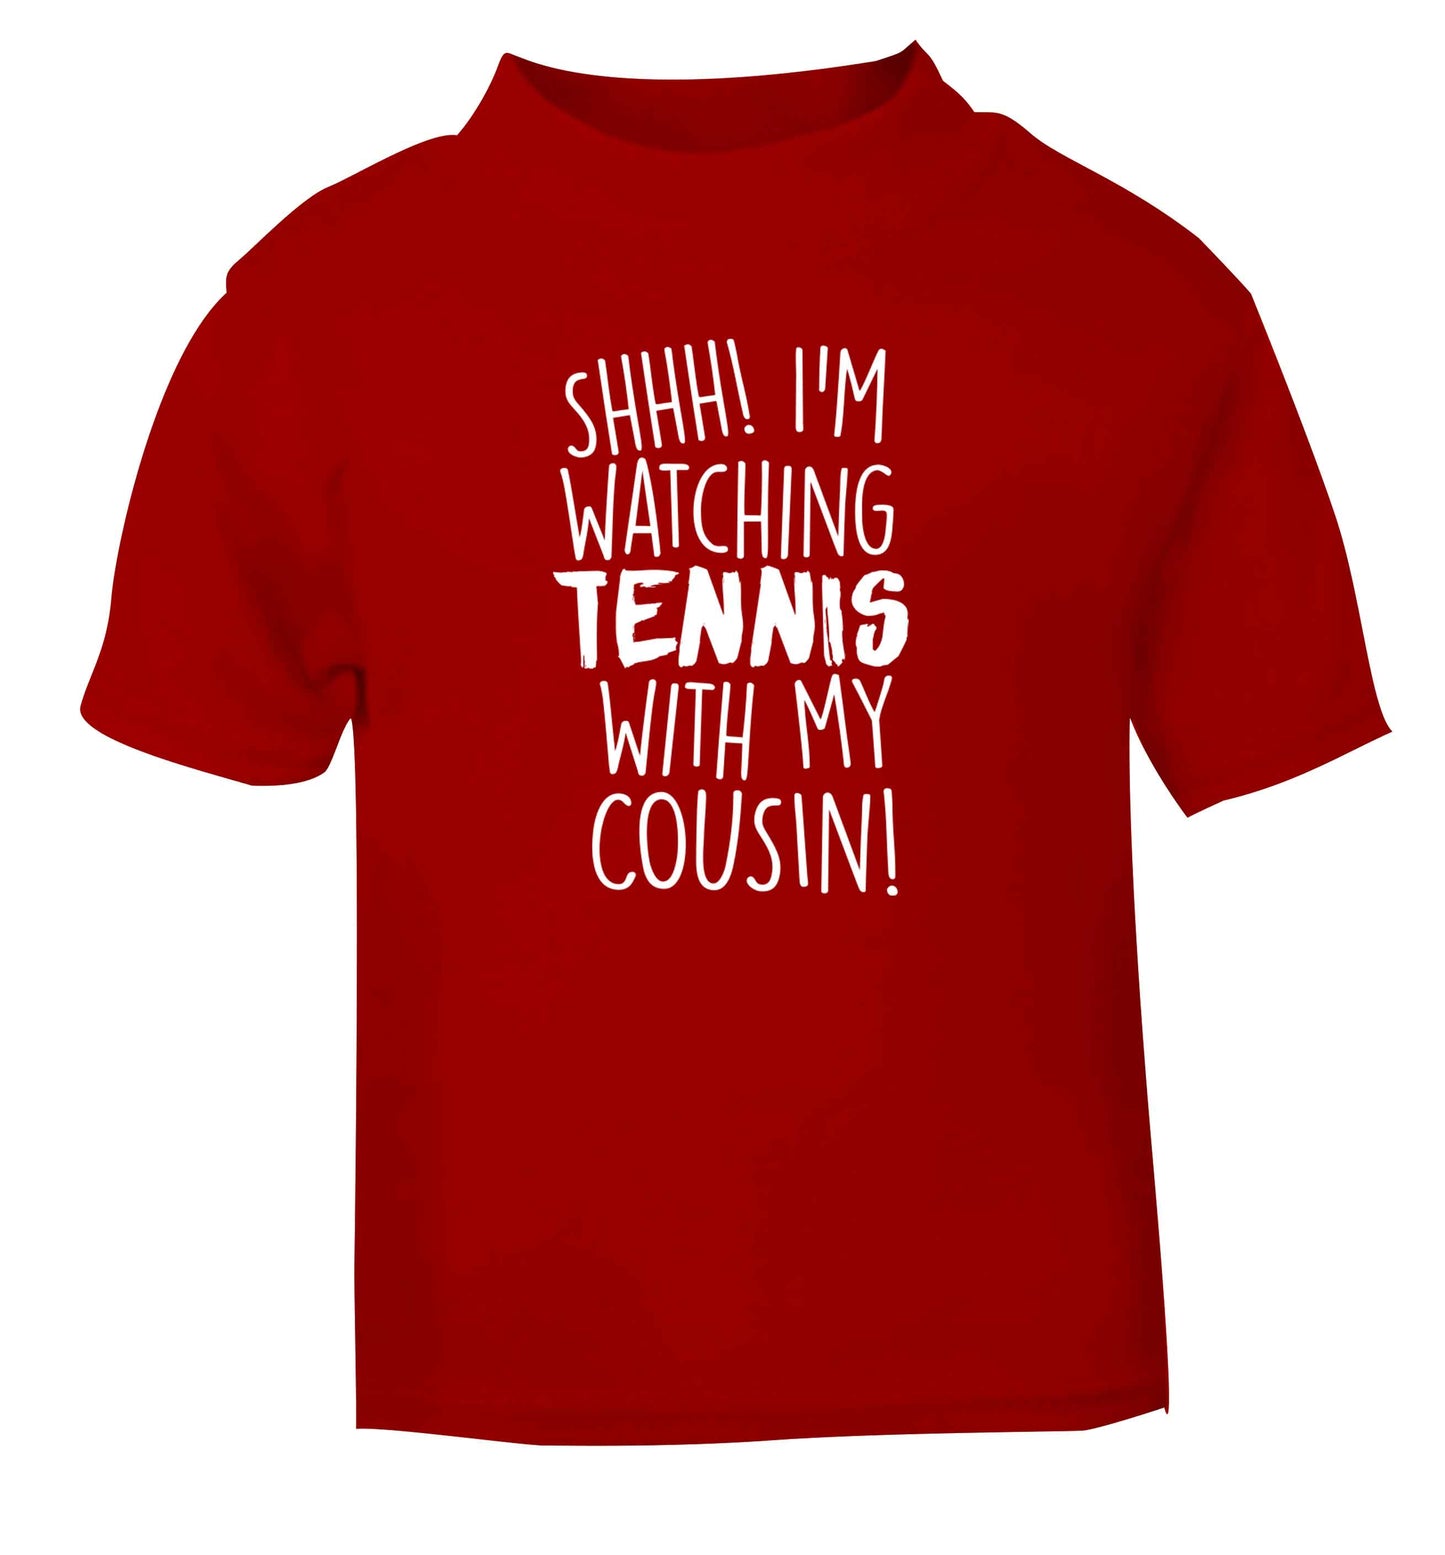 Shh! I'm watching tennis with my cousin! red Baby Toddler Tshirt 2 Years